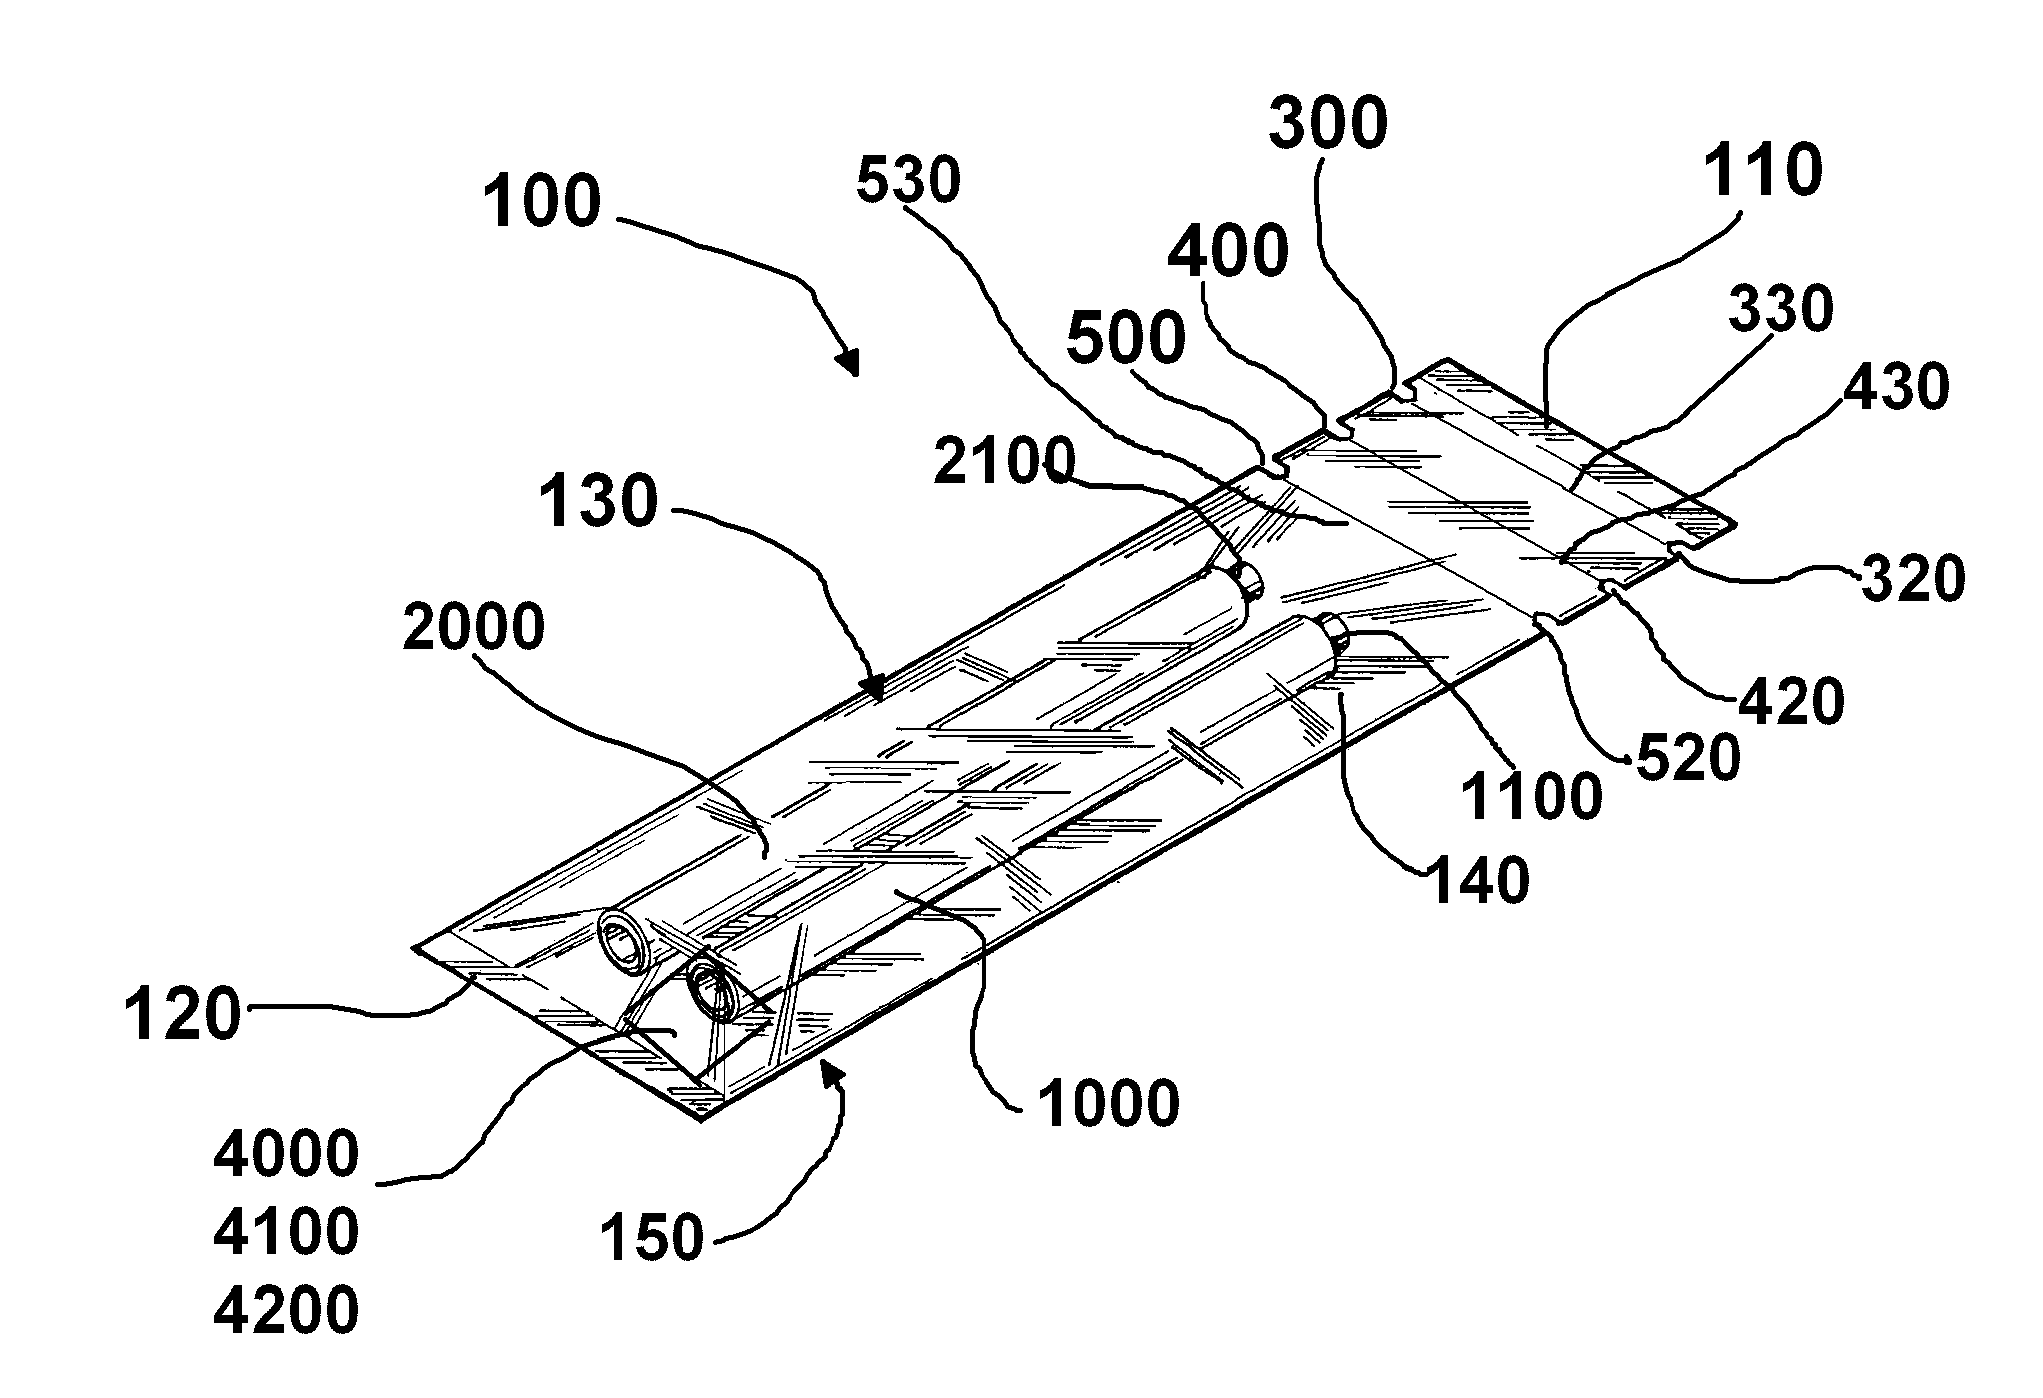 Method and apparatus for making a custom made cigar using resealable packaging unit or pouch having multiple cigar wrappers